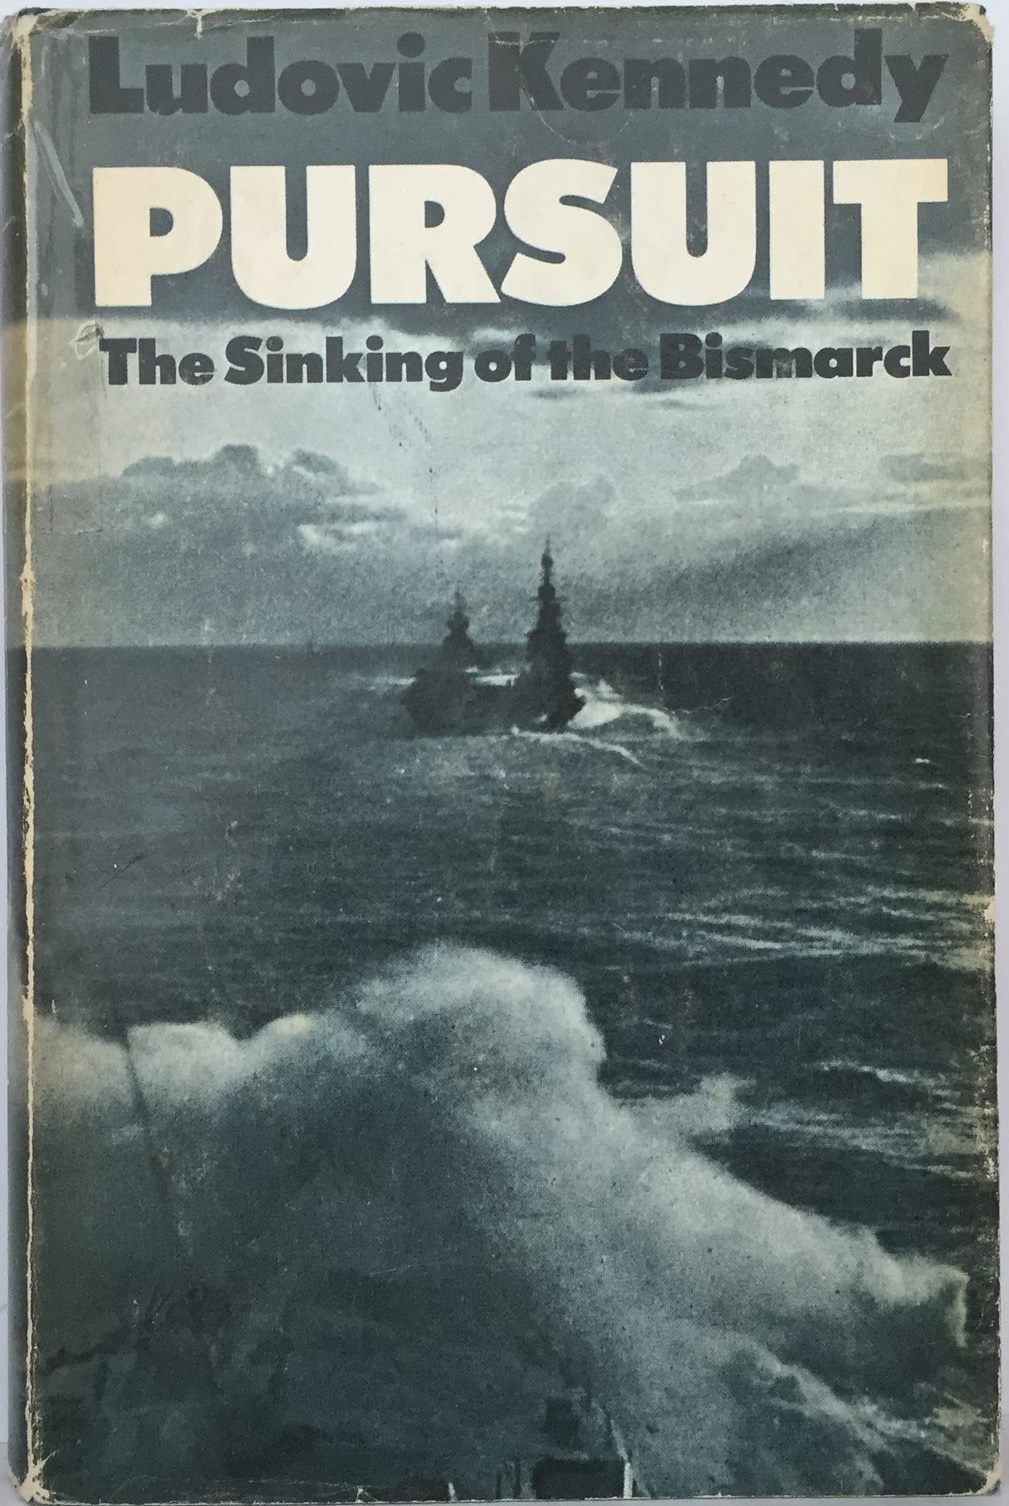 PURSUIT: The sinking of the Bismarck